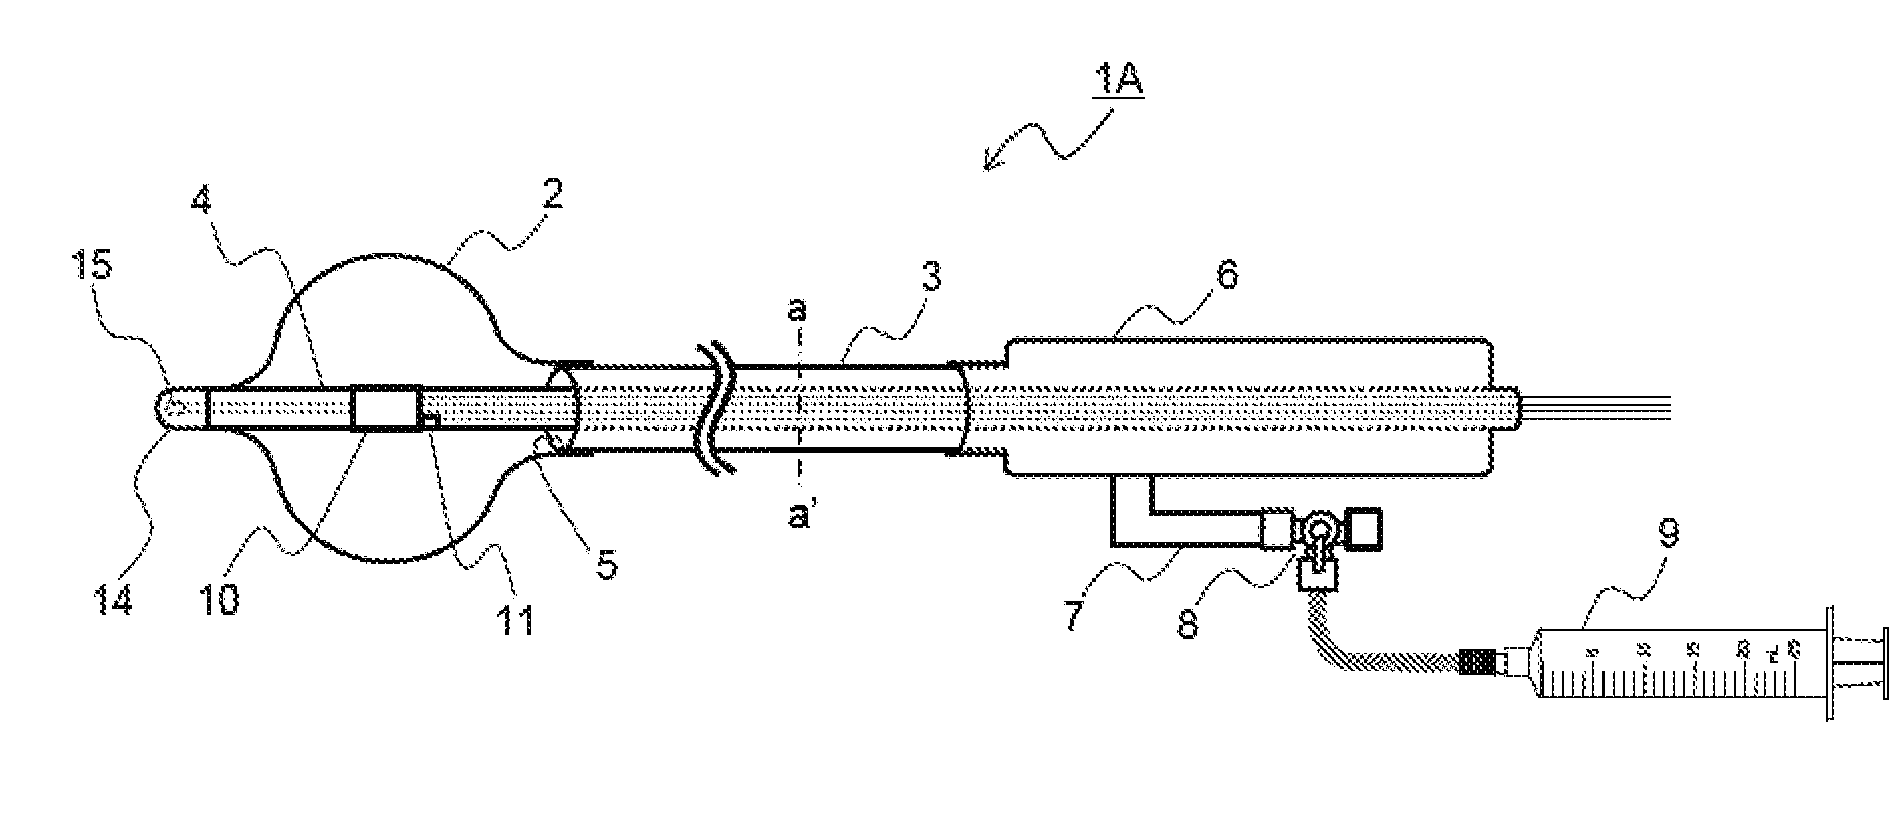 Ablation catheter with balloon and ablation catheter system with balloon